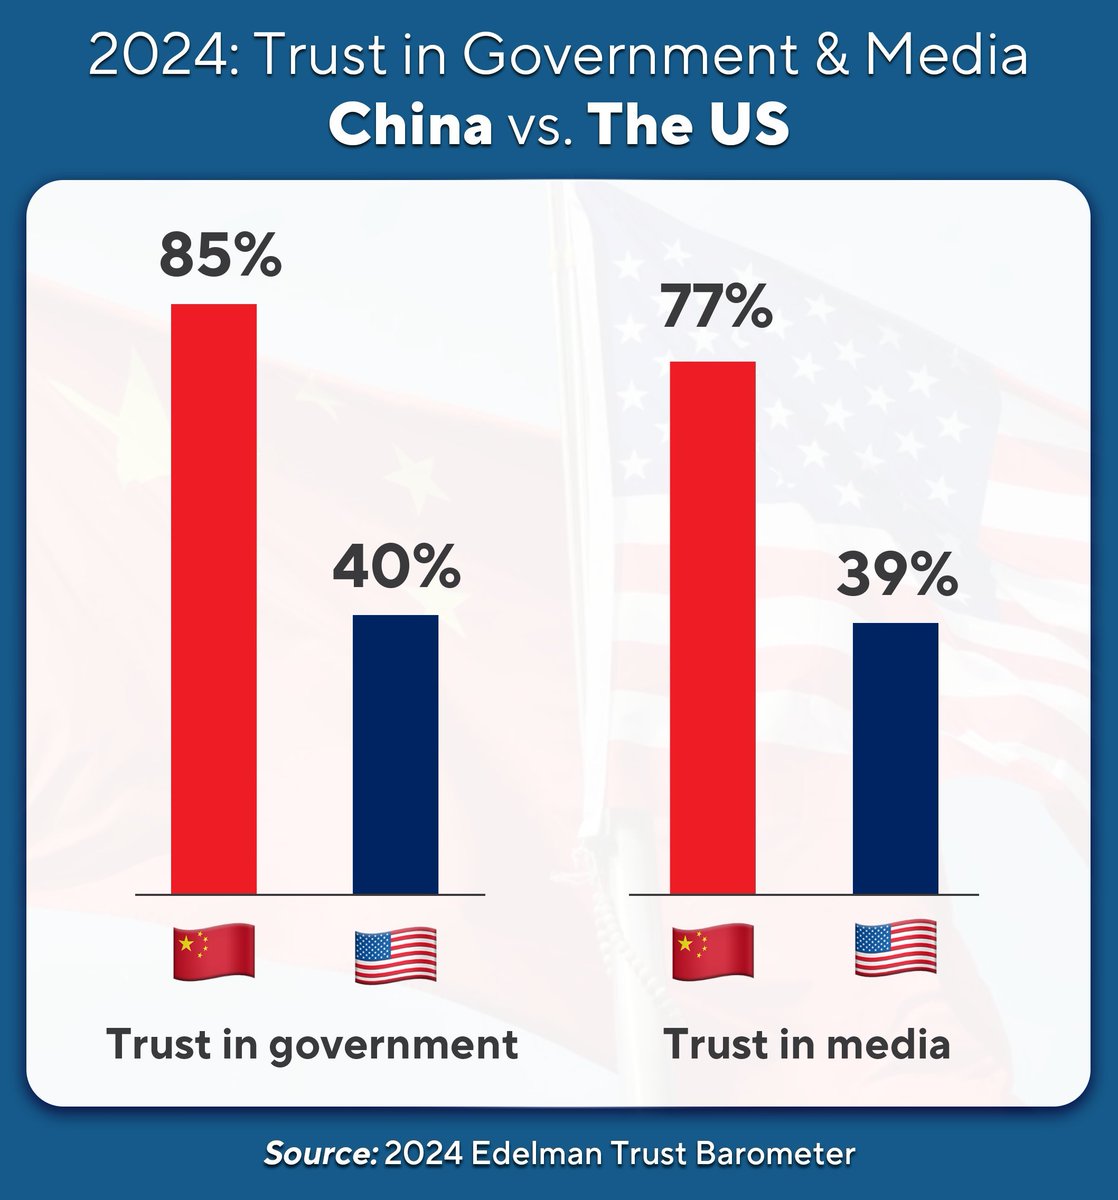 Chinese folks are roughly double as likely to trust their own government and media as US Americans are our own.

#media